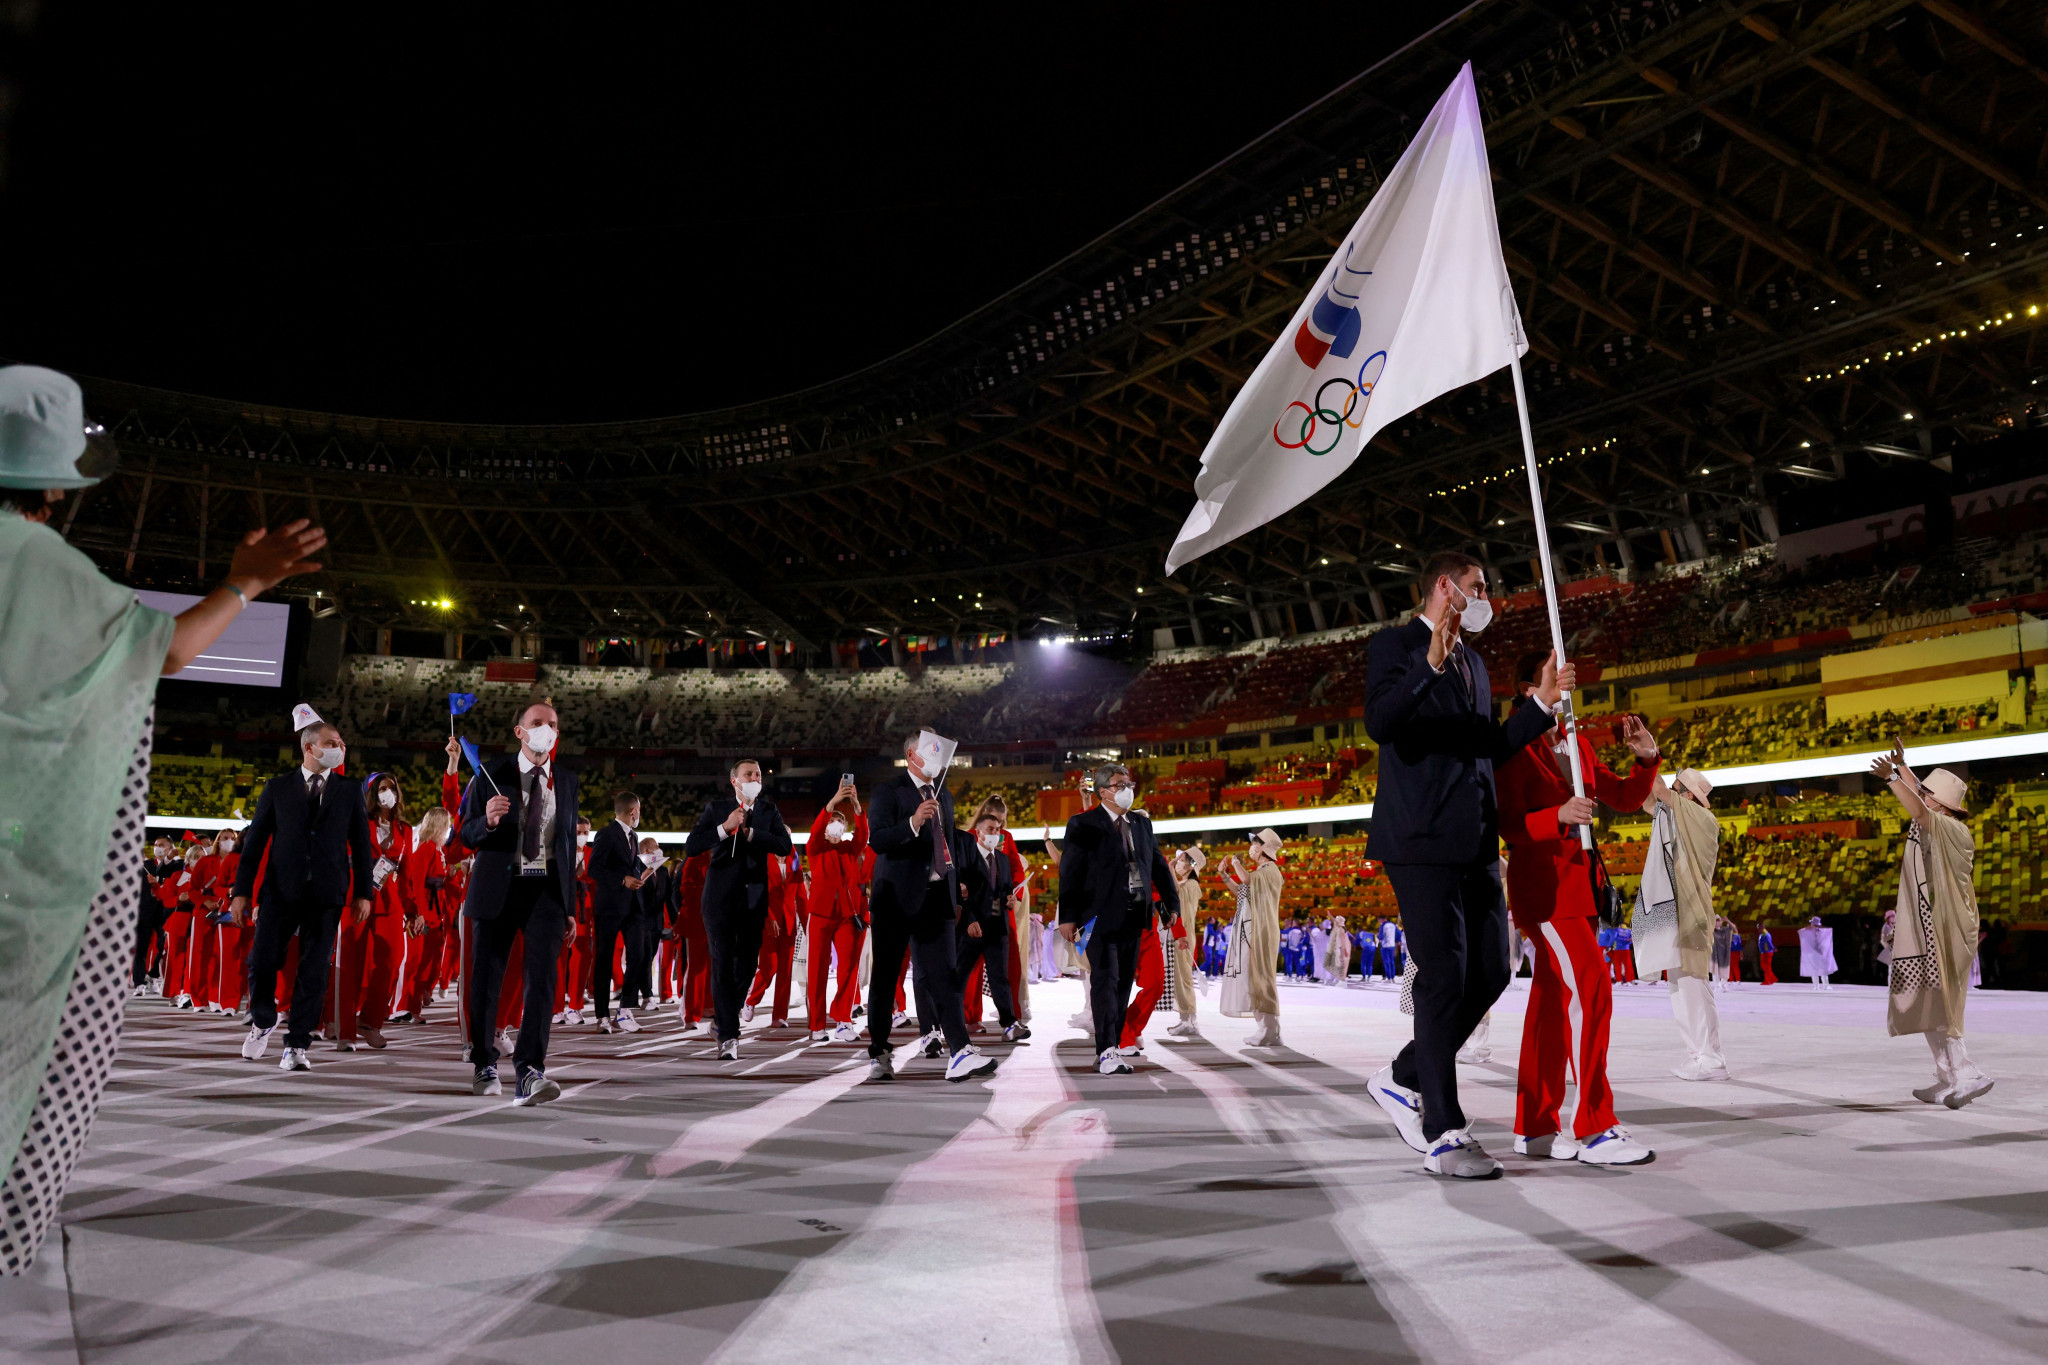 Russian athletes competed under the 